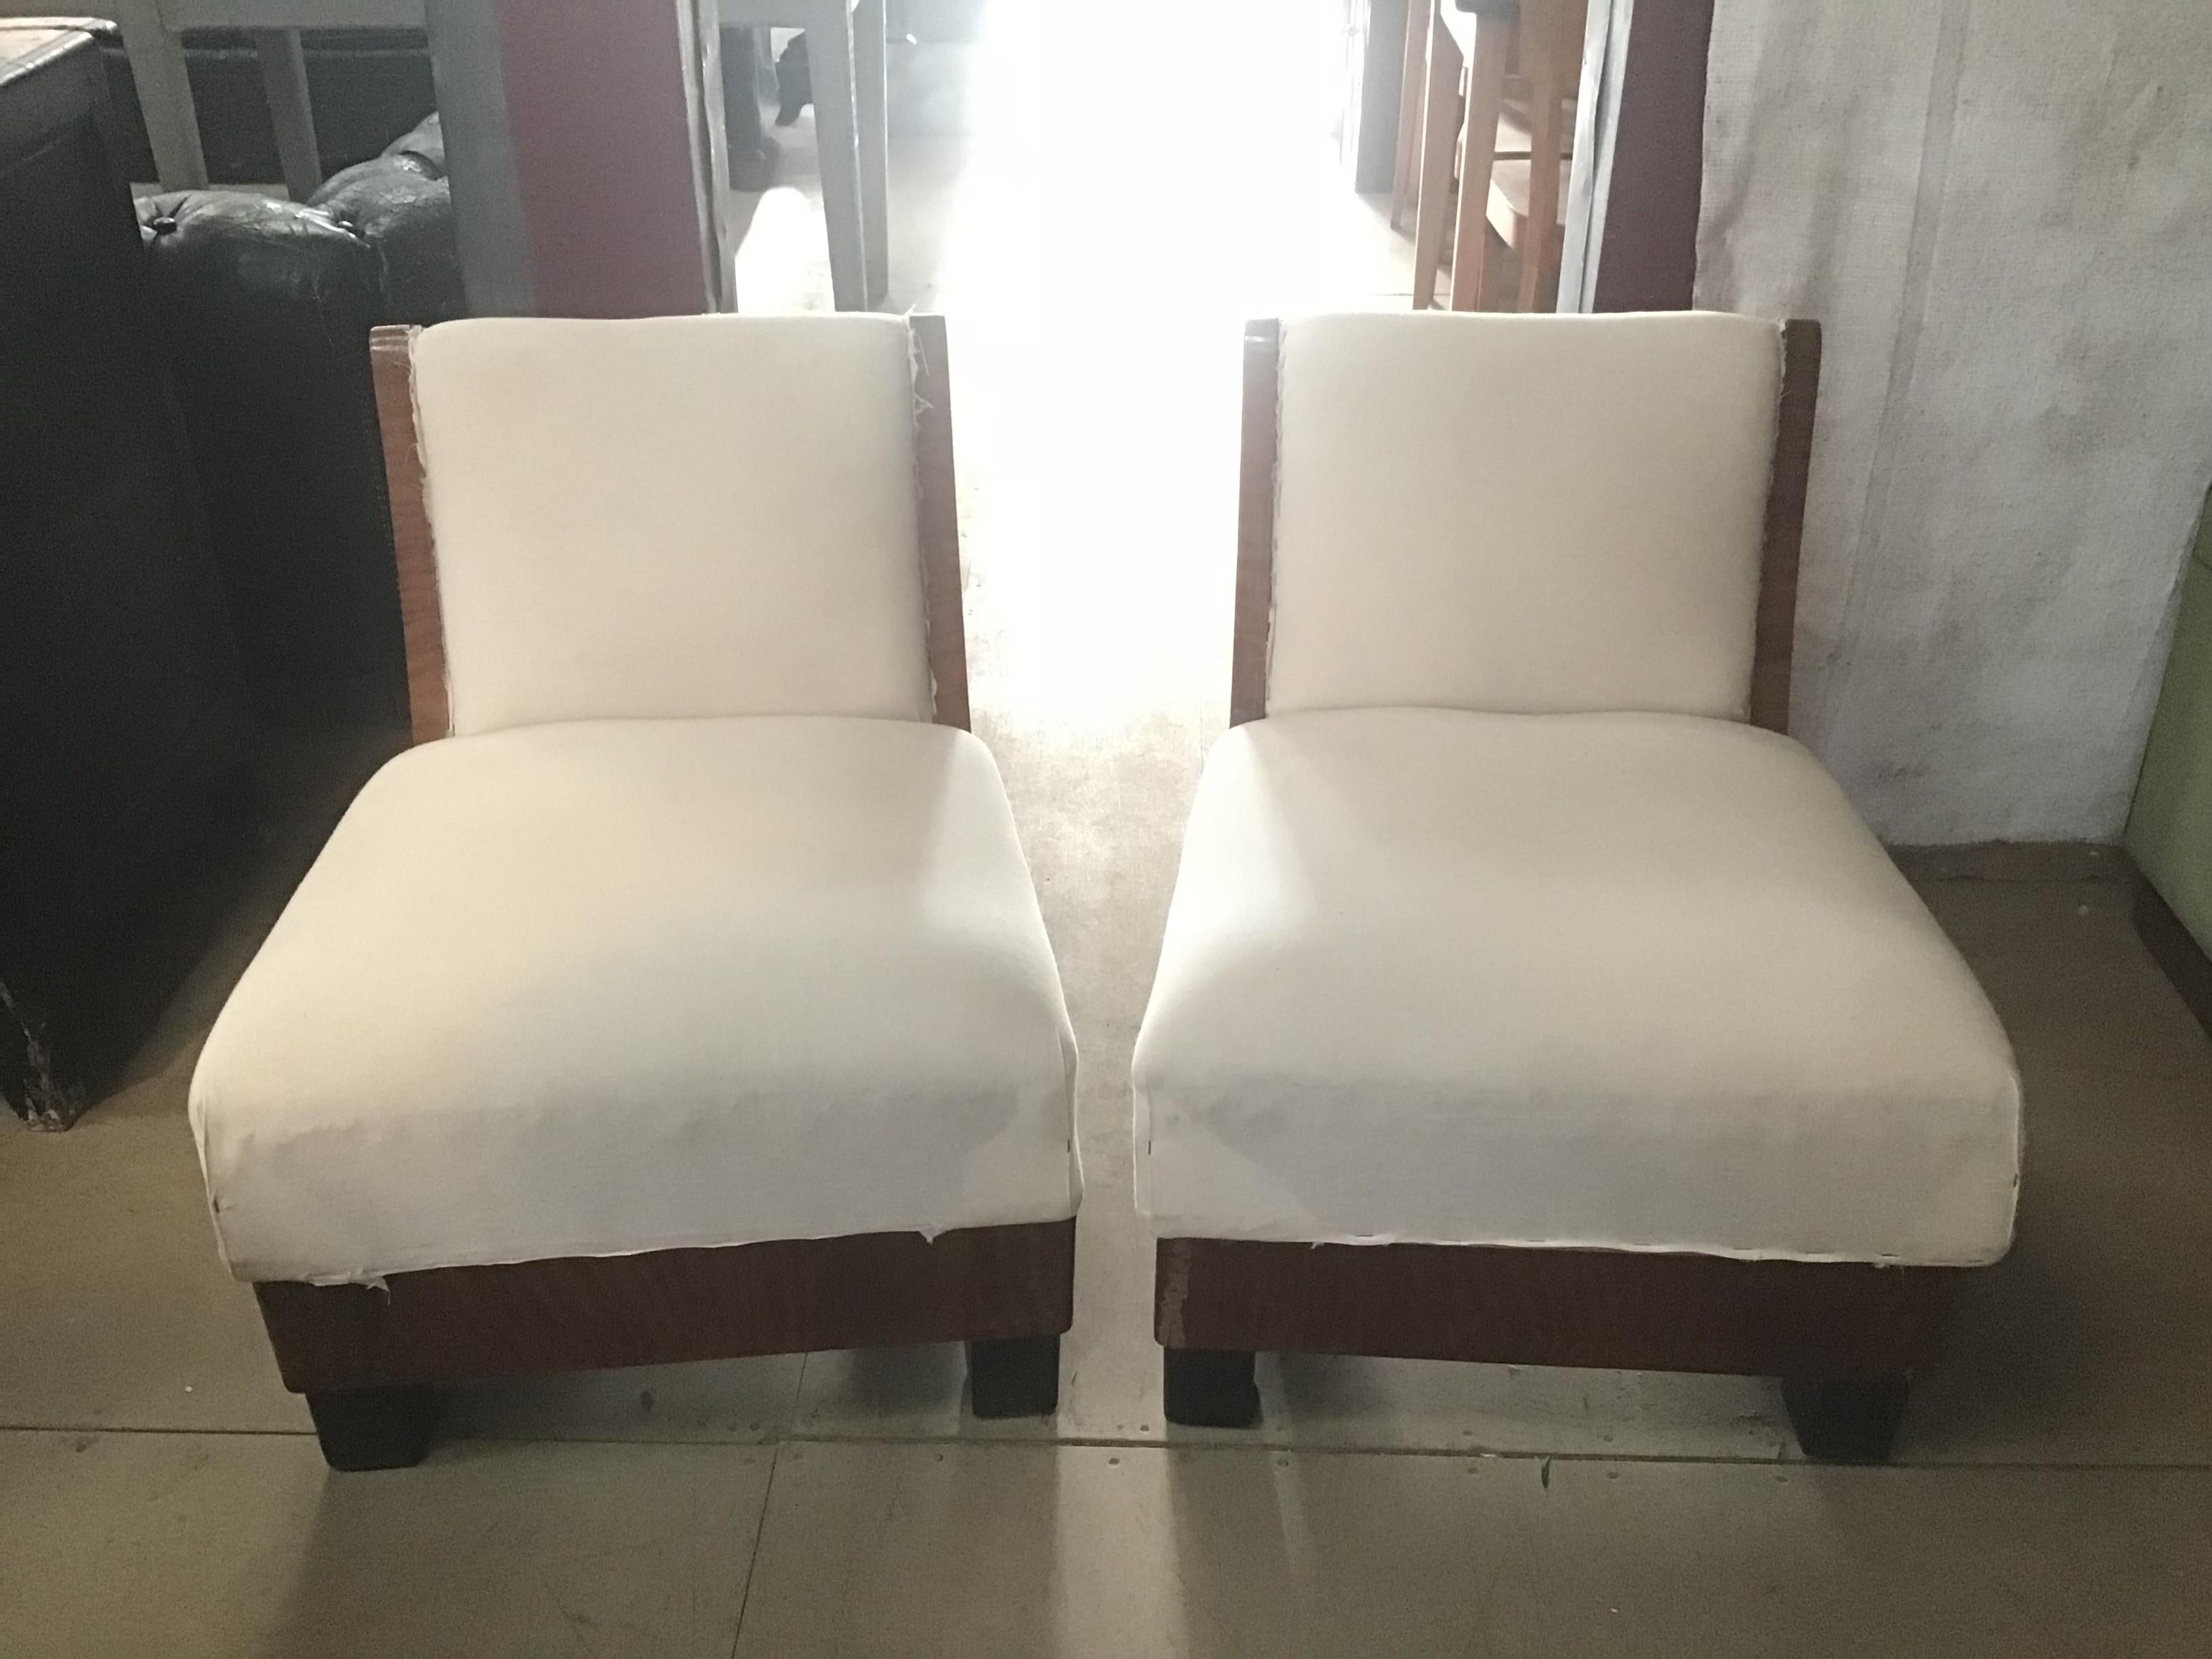 Pair of Art Deco Briar-Root Italian Armchairs from 1940s.